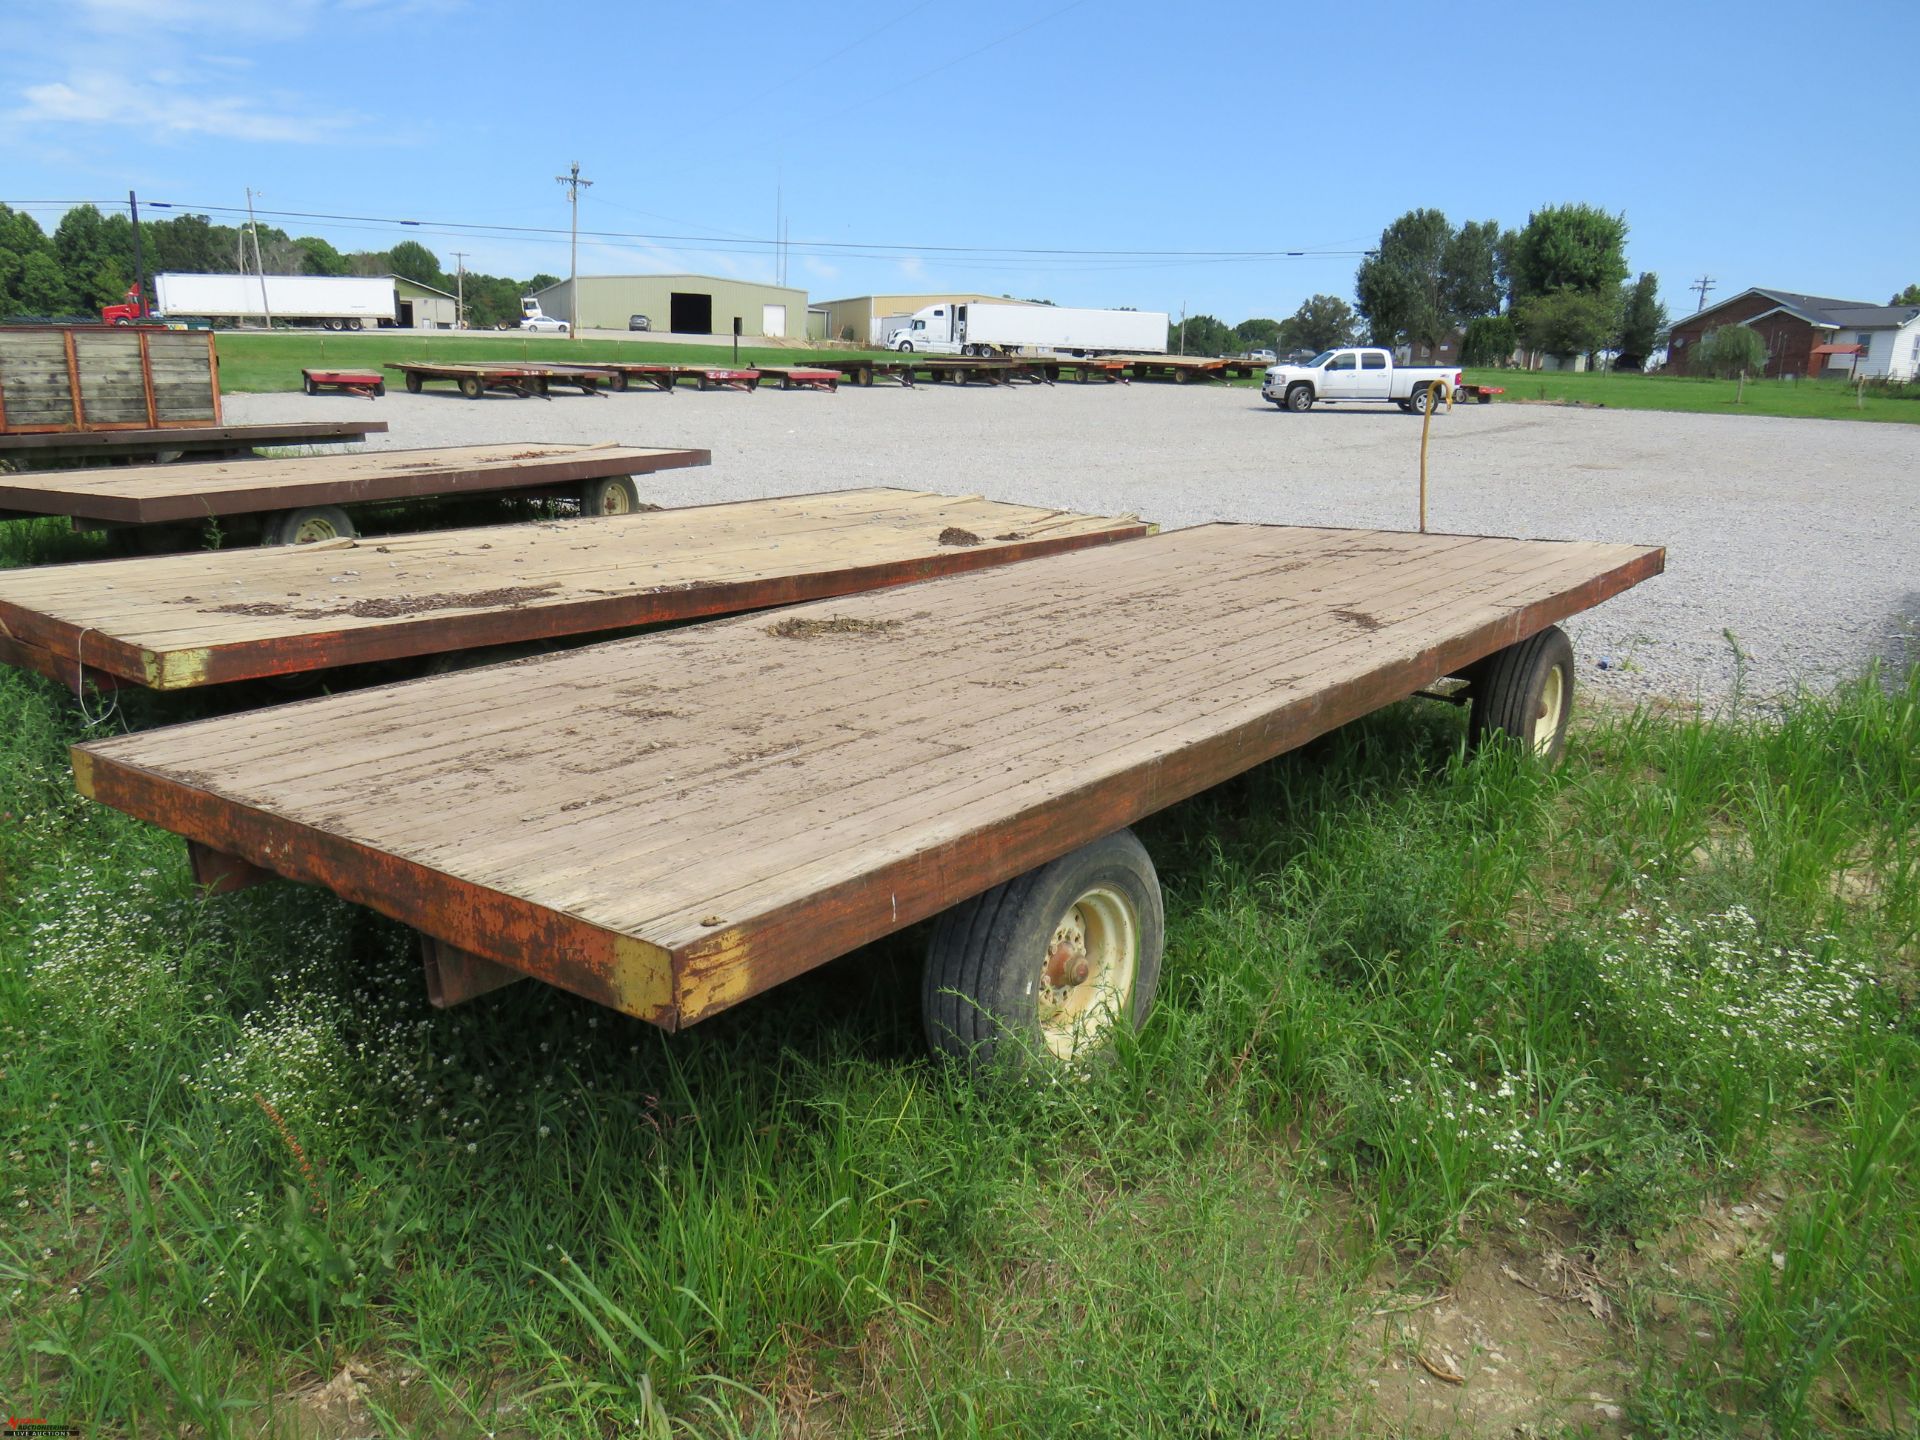 KORY 6072 FLAT BED WAGON, 20', TIE ROD STEERING, PIN HITCH, HAS FLAT TIRE - Image 2 of 3